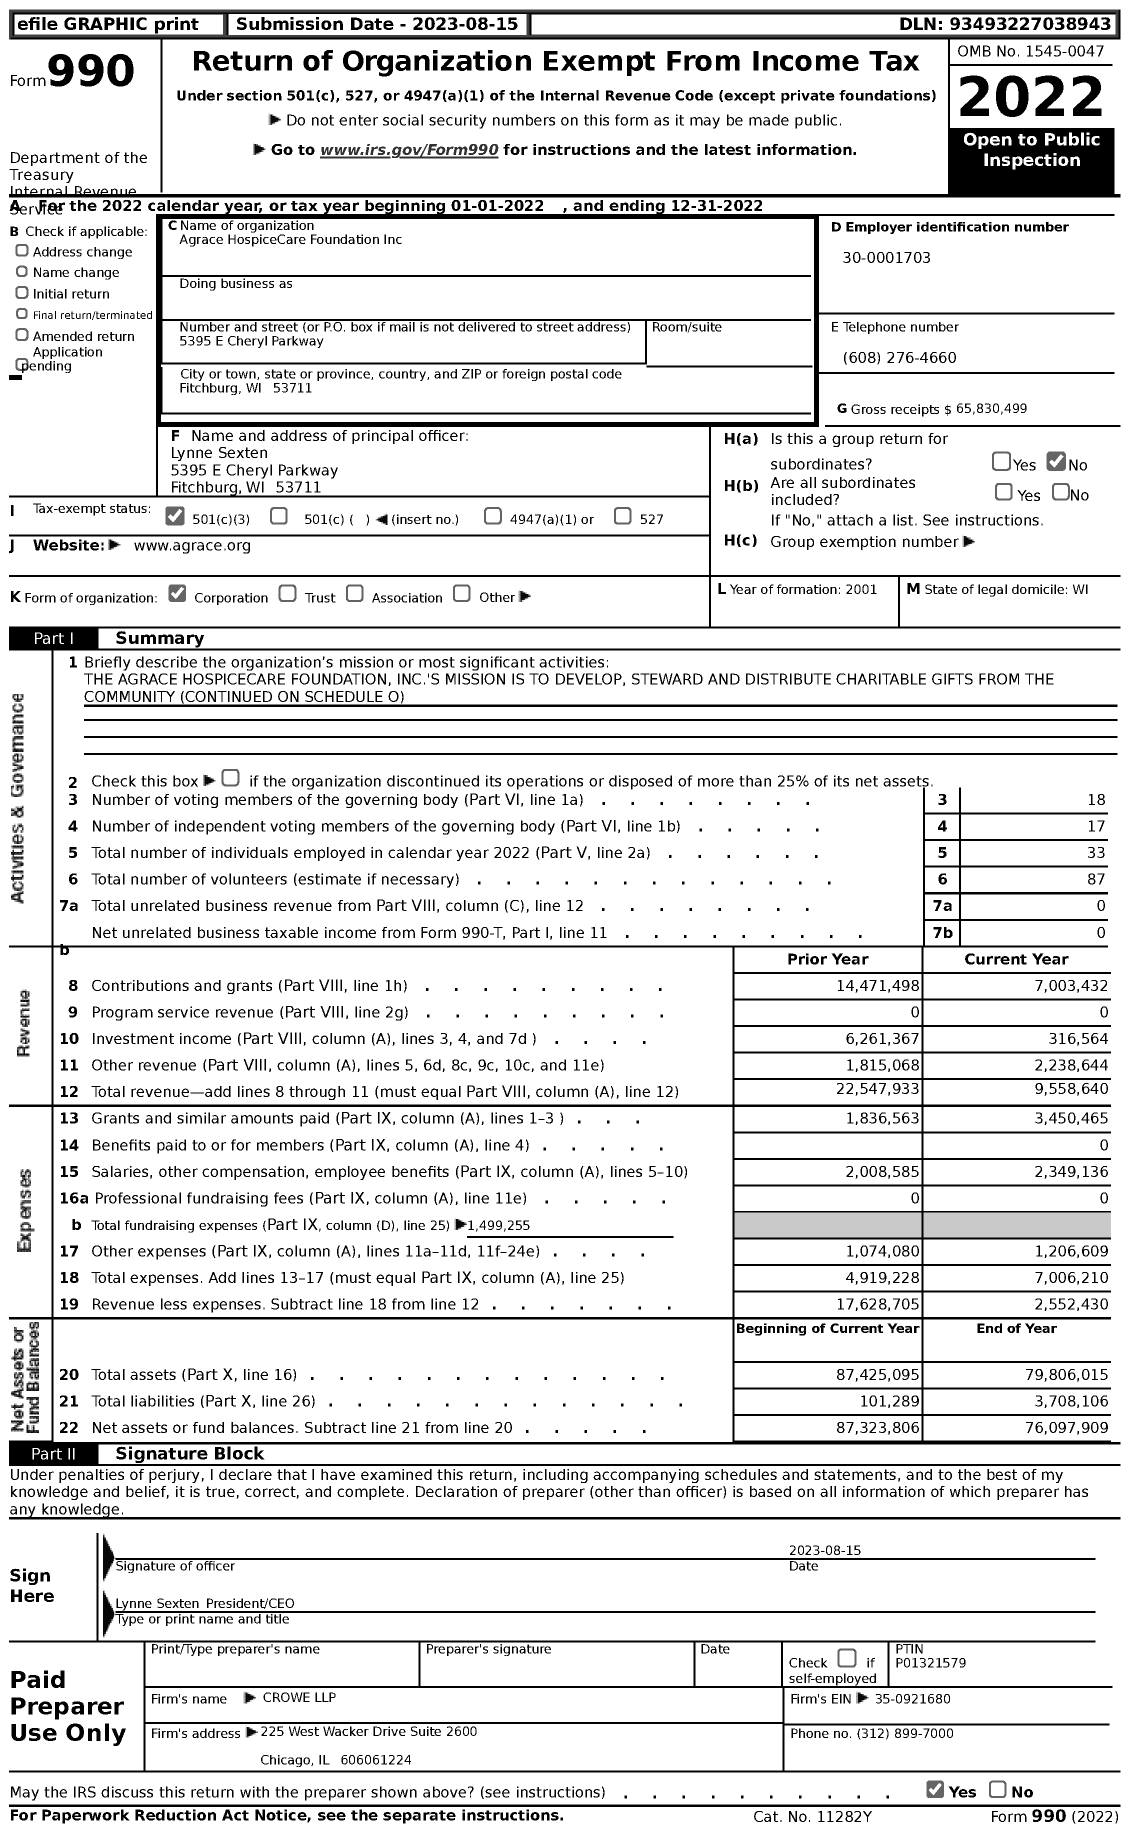 Image of first page of 2022 Form 990 for Agrace HospiceCare Foundation